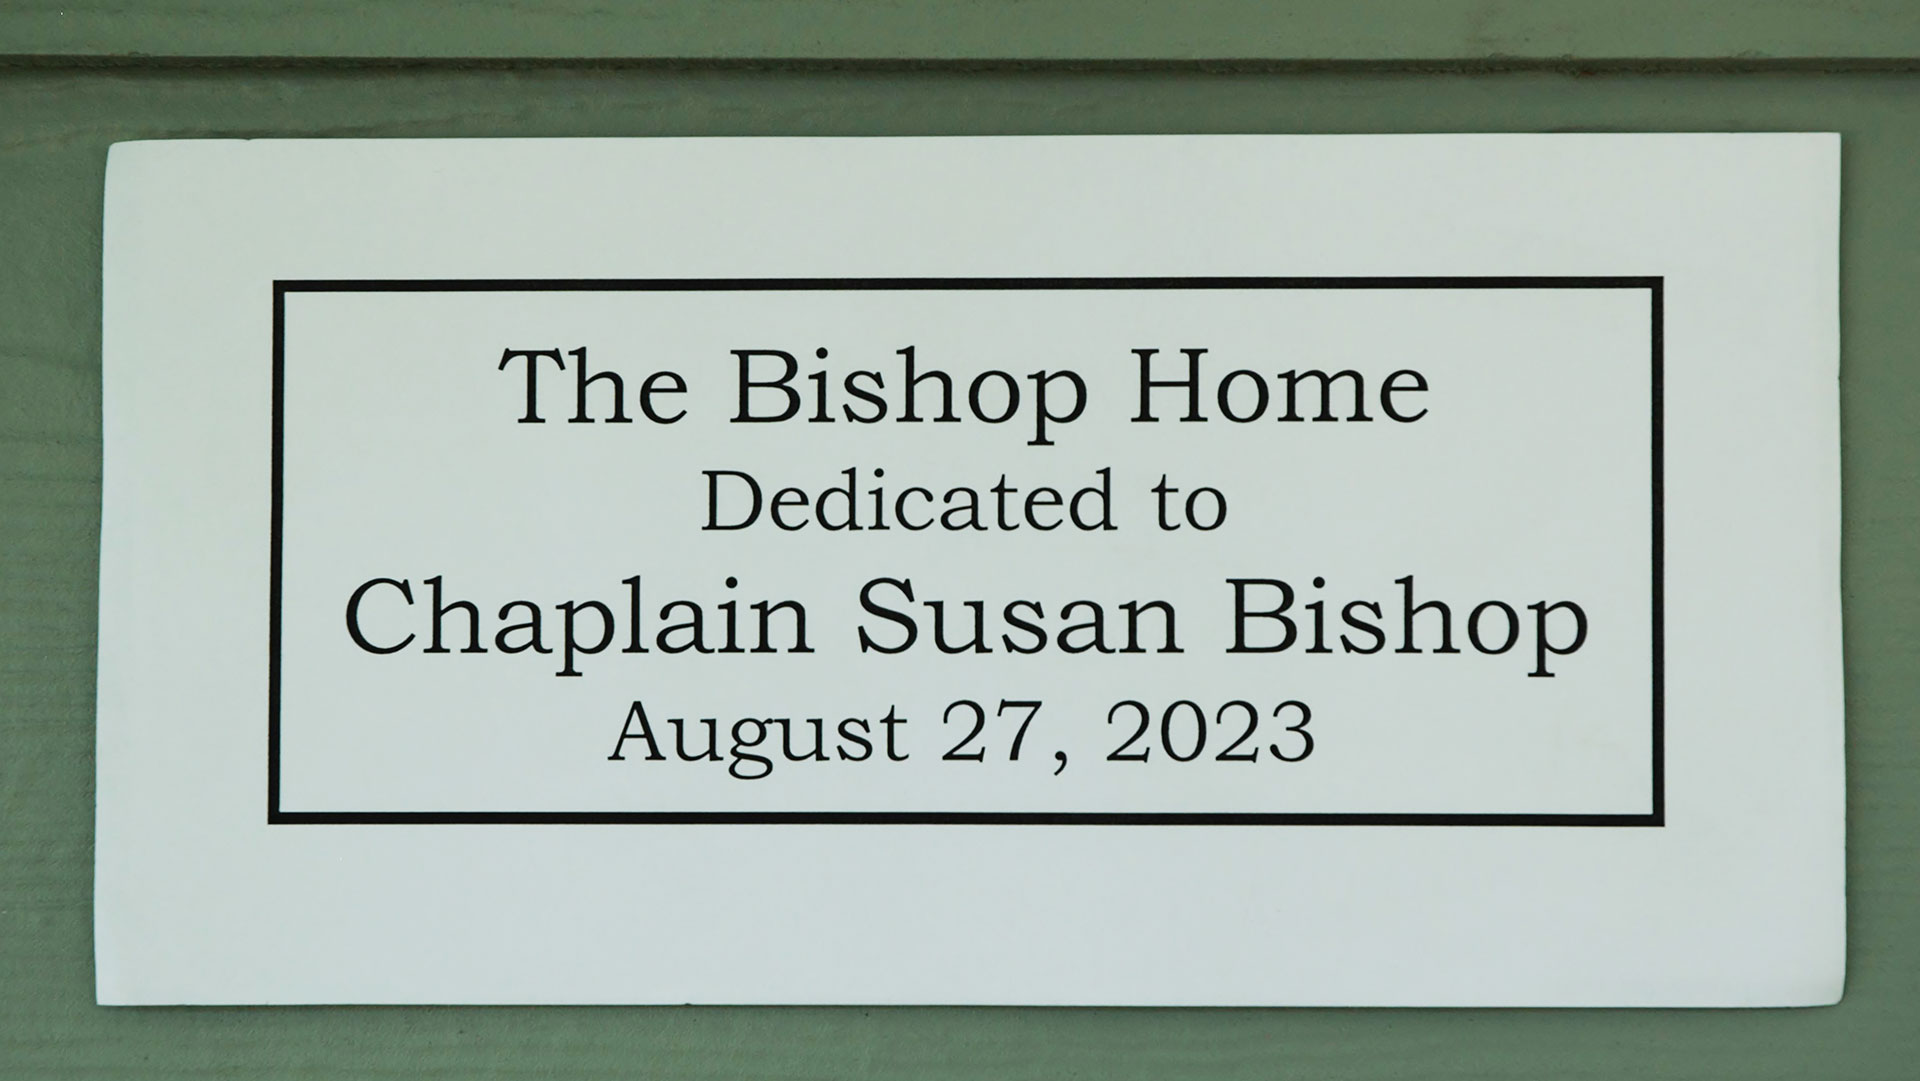 The Welcome Home House is a collaboration between Peachtree Road United Methodist Church, City of Refuge, and Atlanta Habitat for Humanity. A ribbon cutting ceremony was held in August 2023 with representatives and supporters from these three philantrhopic institutions. The house is dedicated in honor of Chaplain Susan Bishop, who served more than 40 years as a Chaplain in the Georgia Department of Corrections.